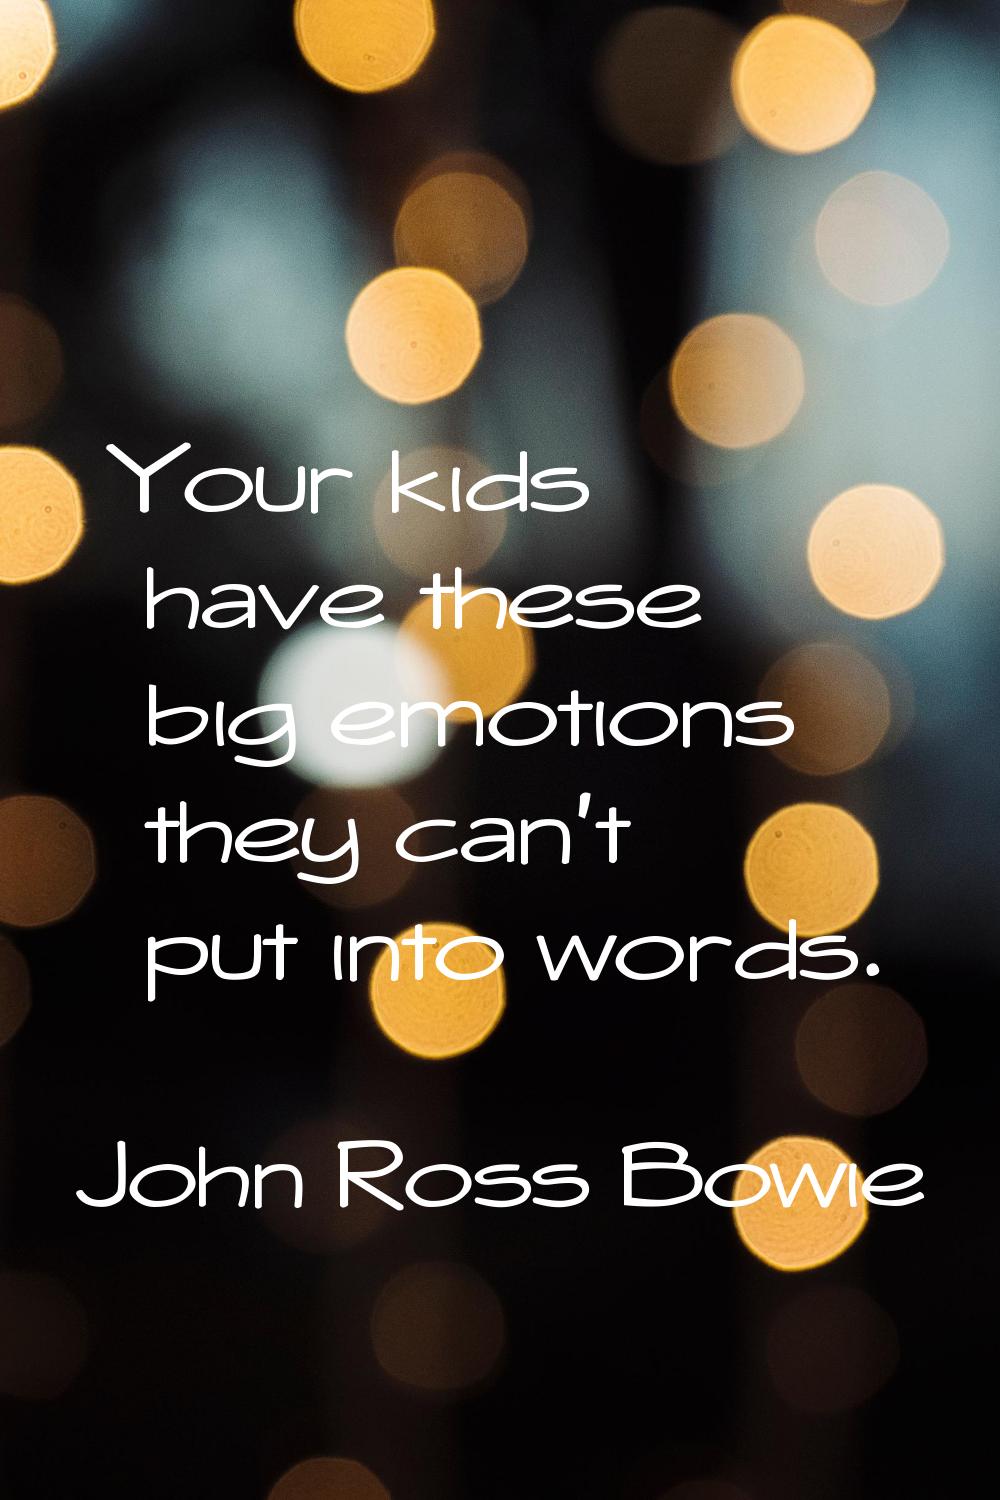 Your kids have these big emotions they can't put into words.